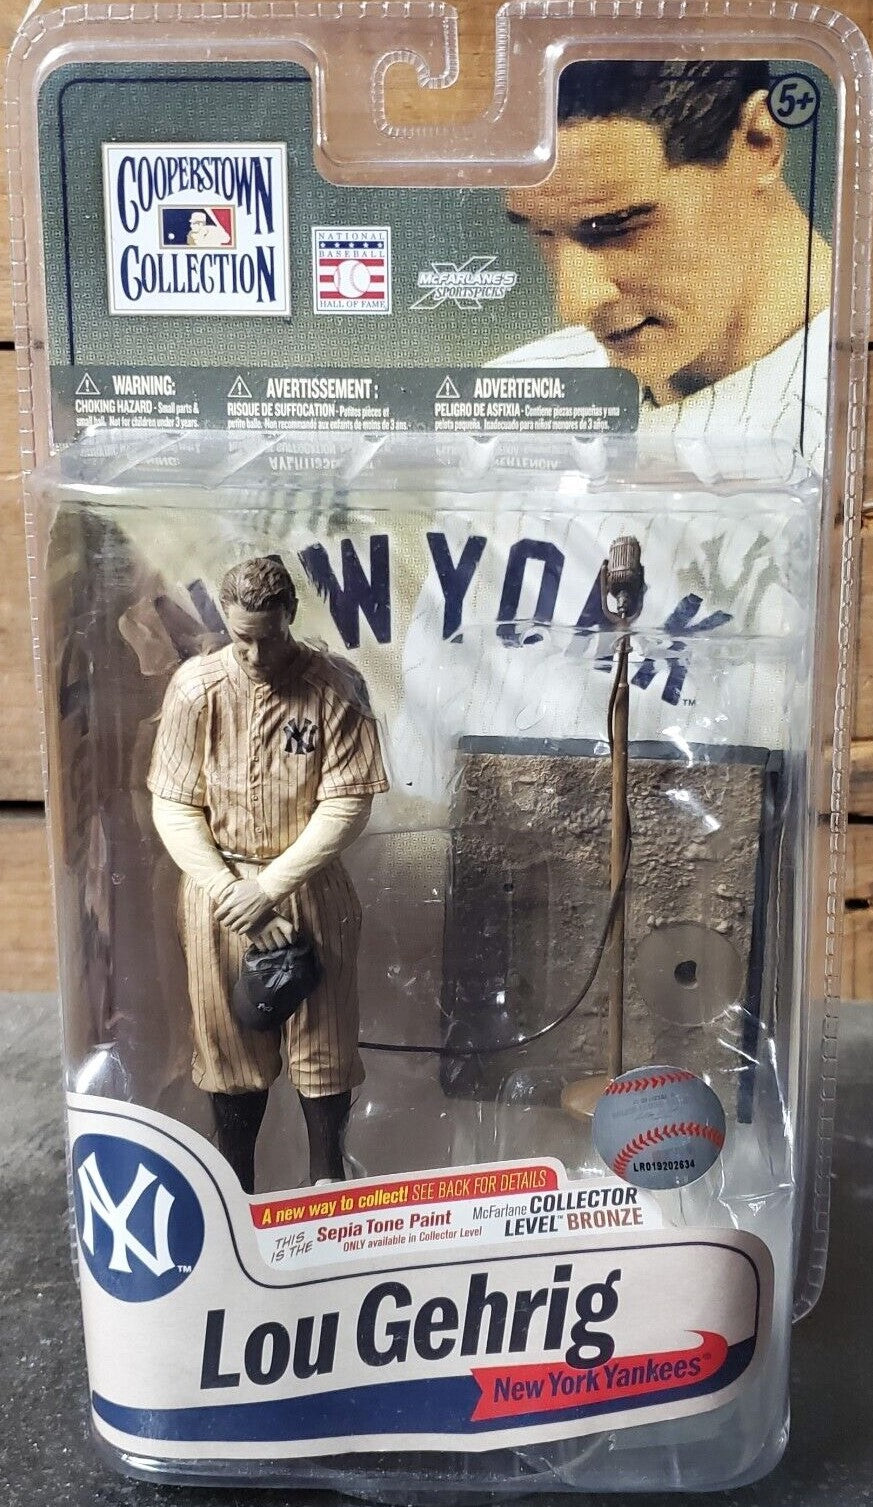 MLB Cooperstown series 7 LOU GEHRIG Collectors Level action figure